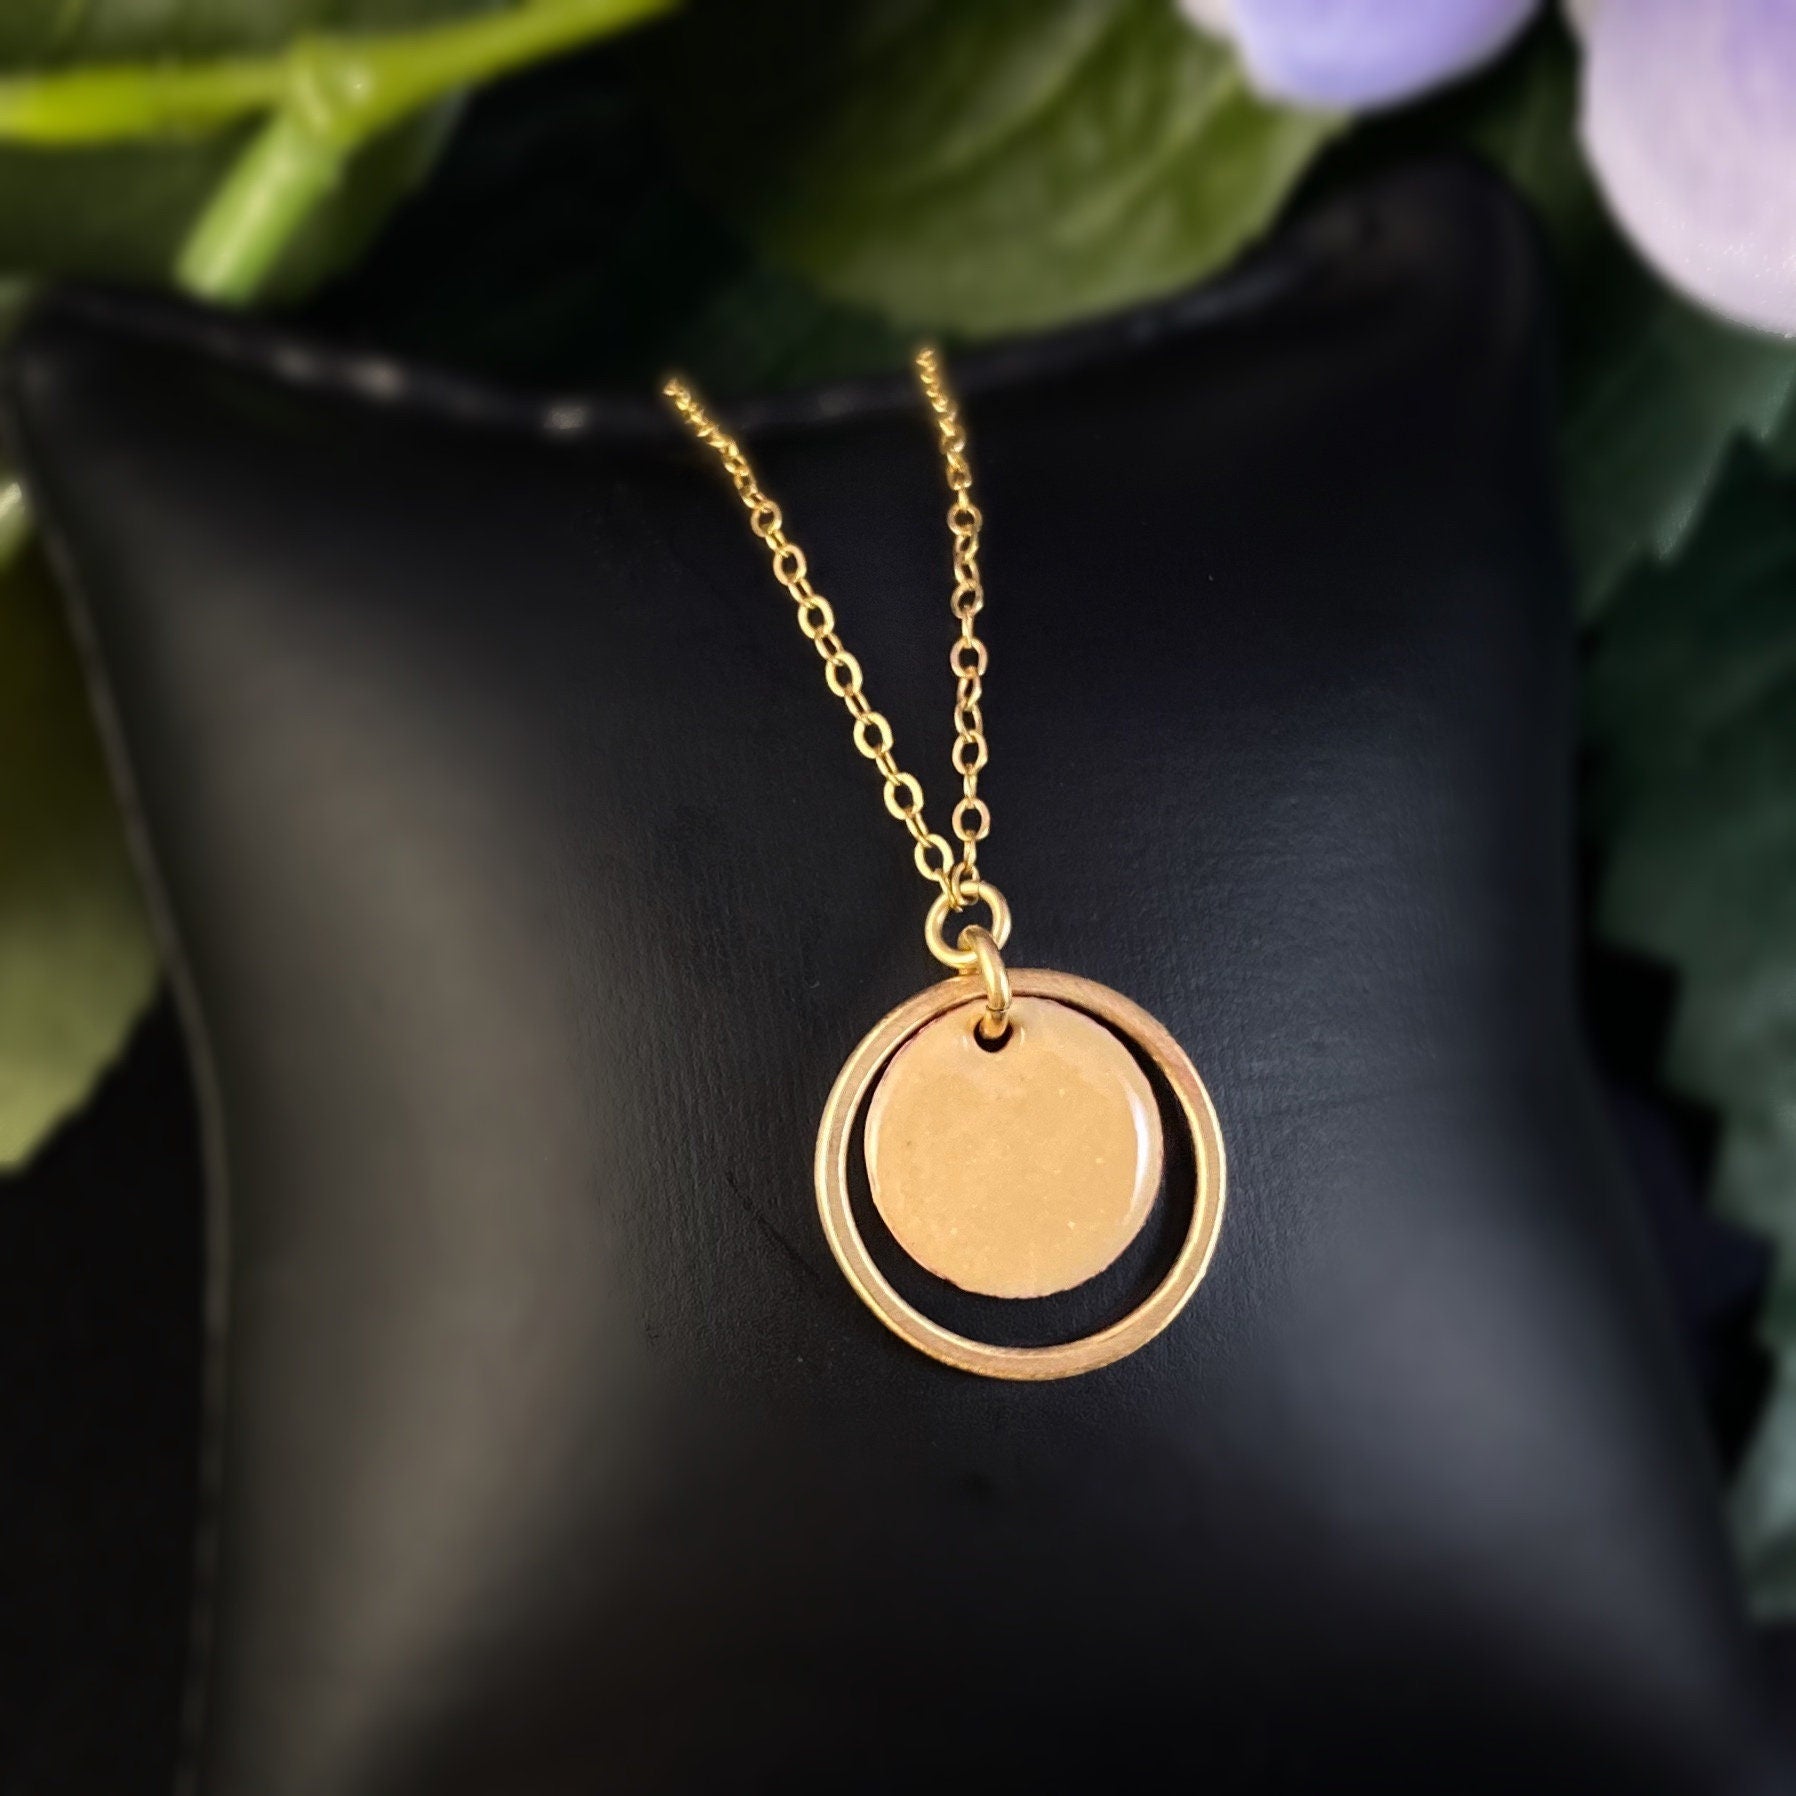 J and I Handmade Round Gold and Peach Pendant Necklace